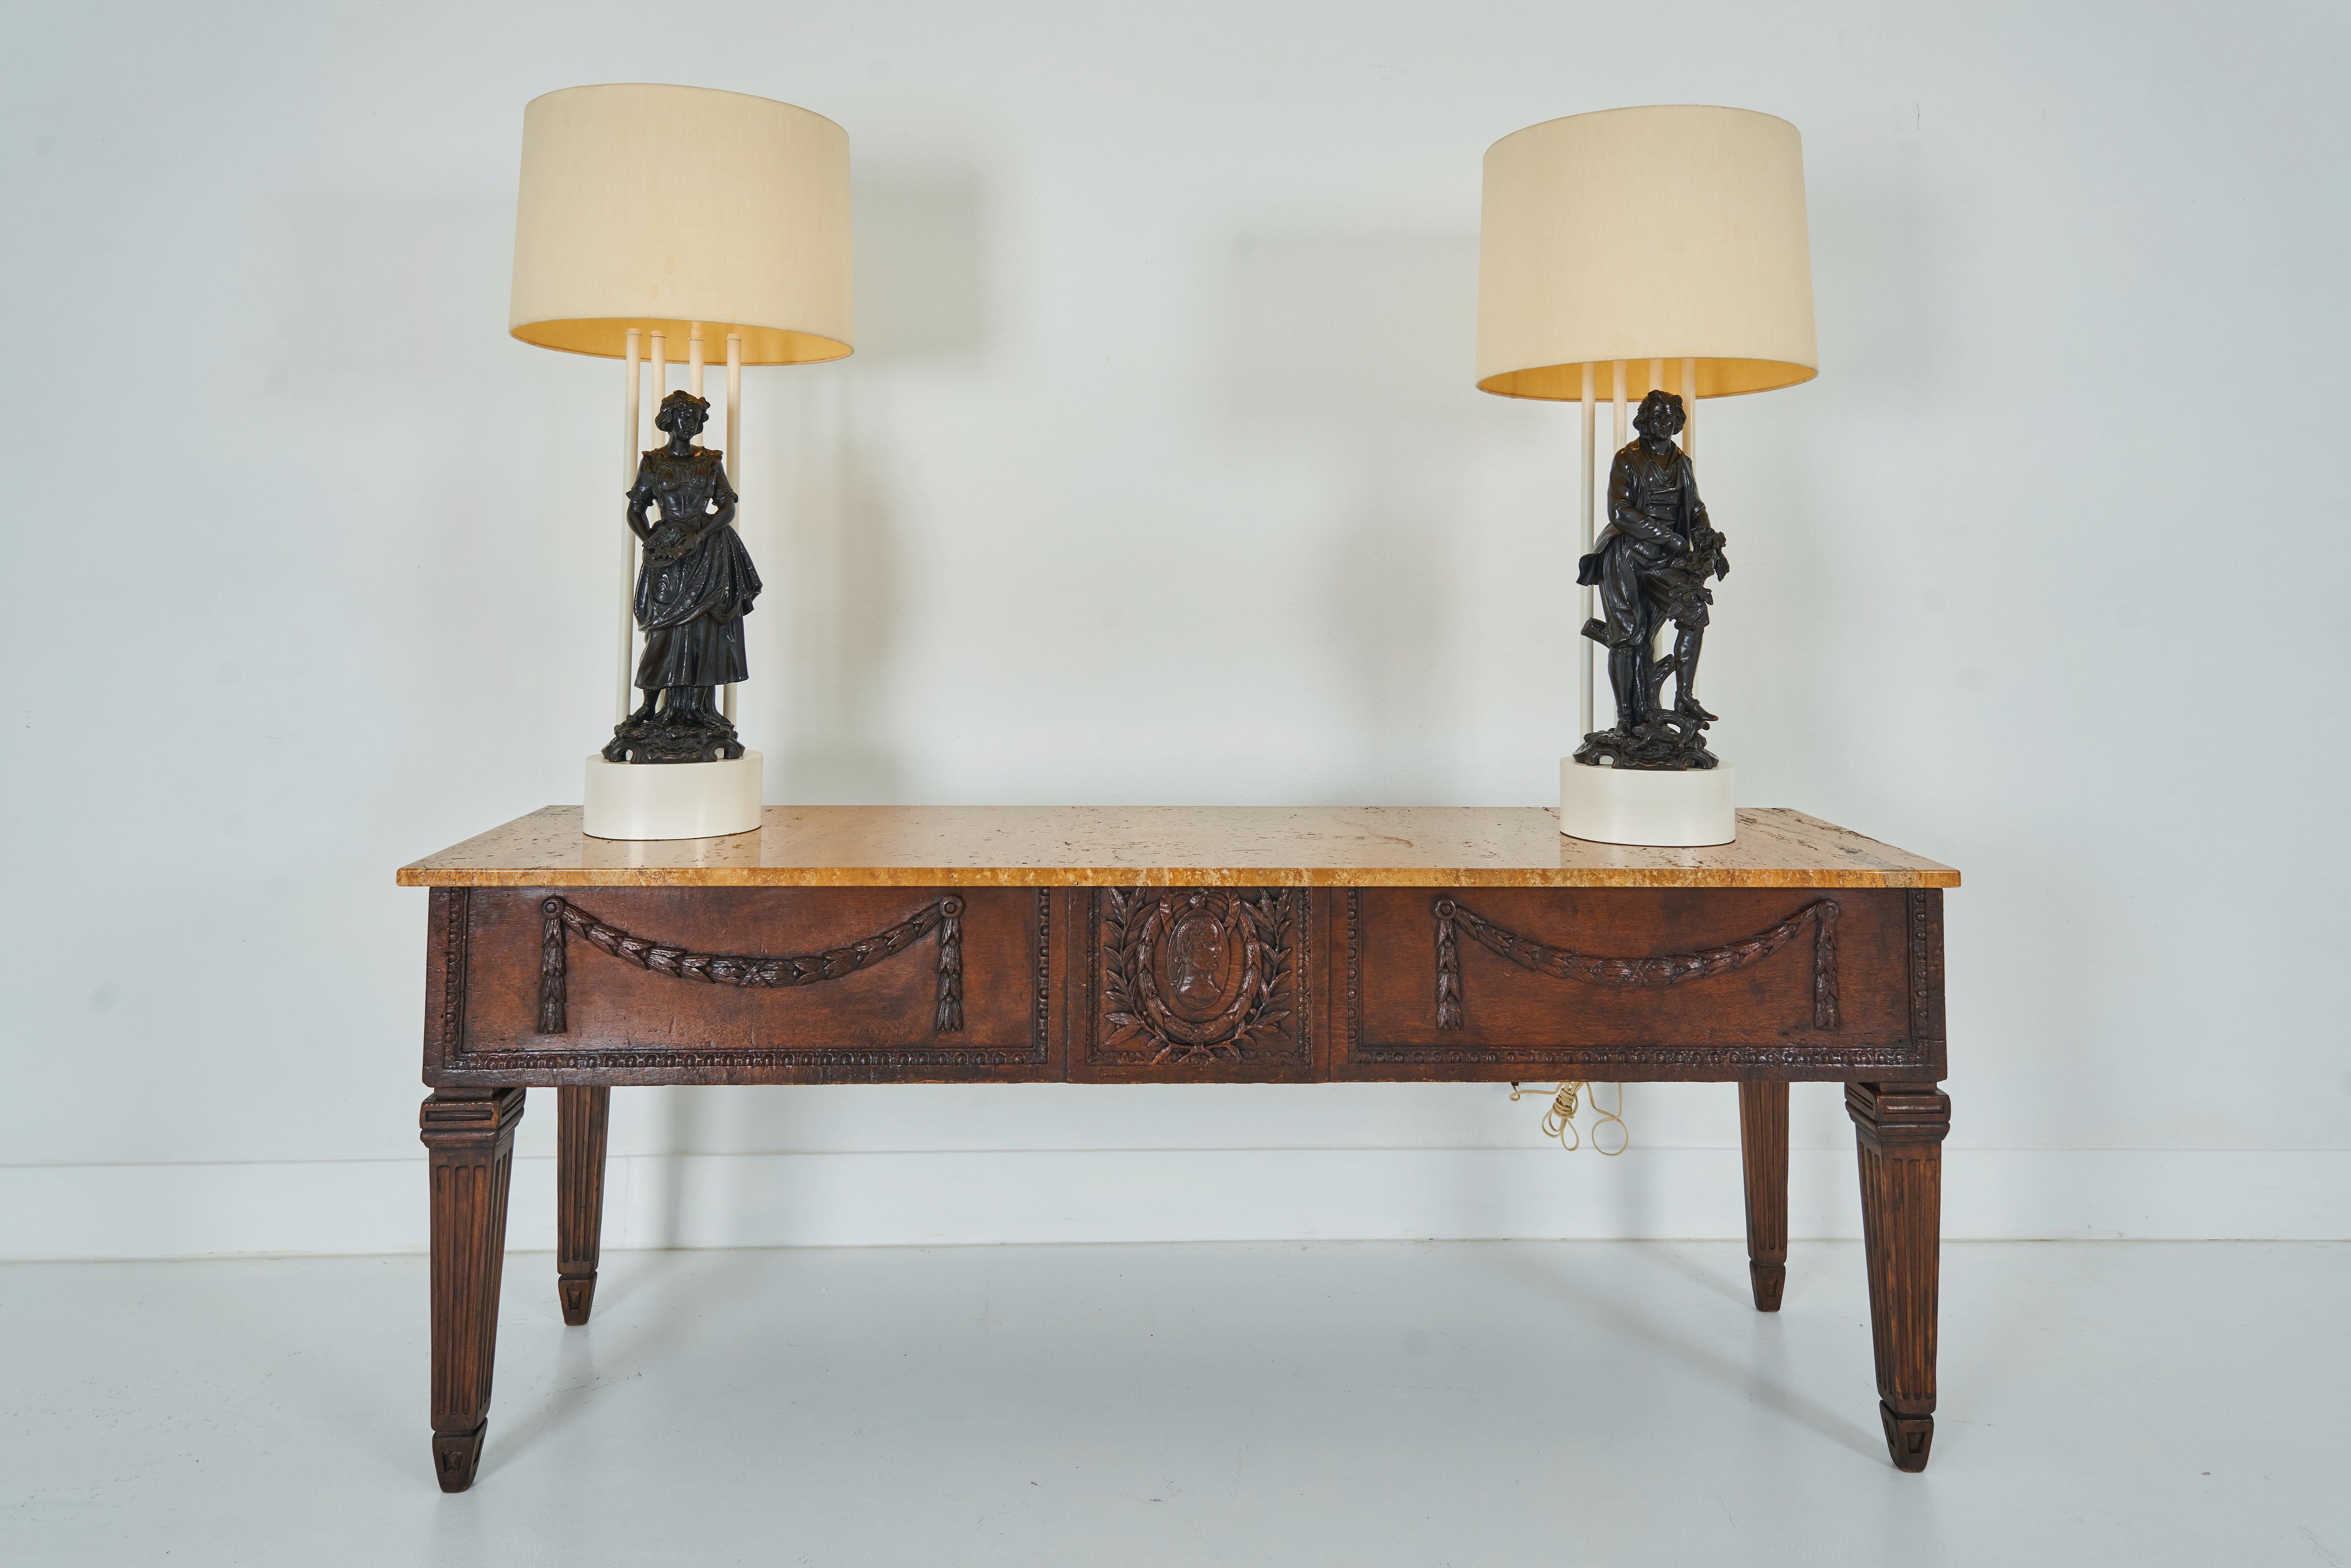 Mid-Century Modern A Pair of White Painted Armature Lamps with Terracotta Figures by William Haines